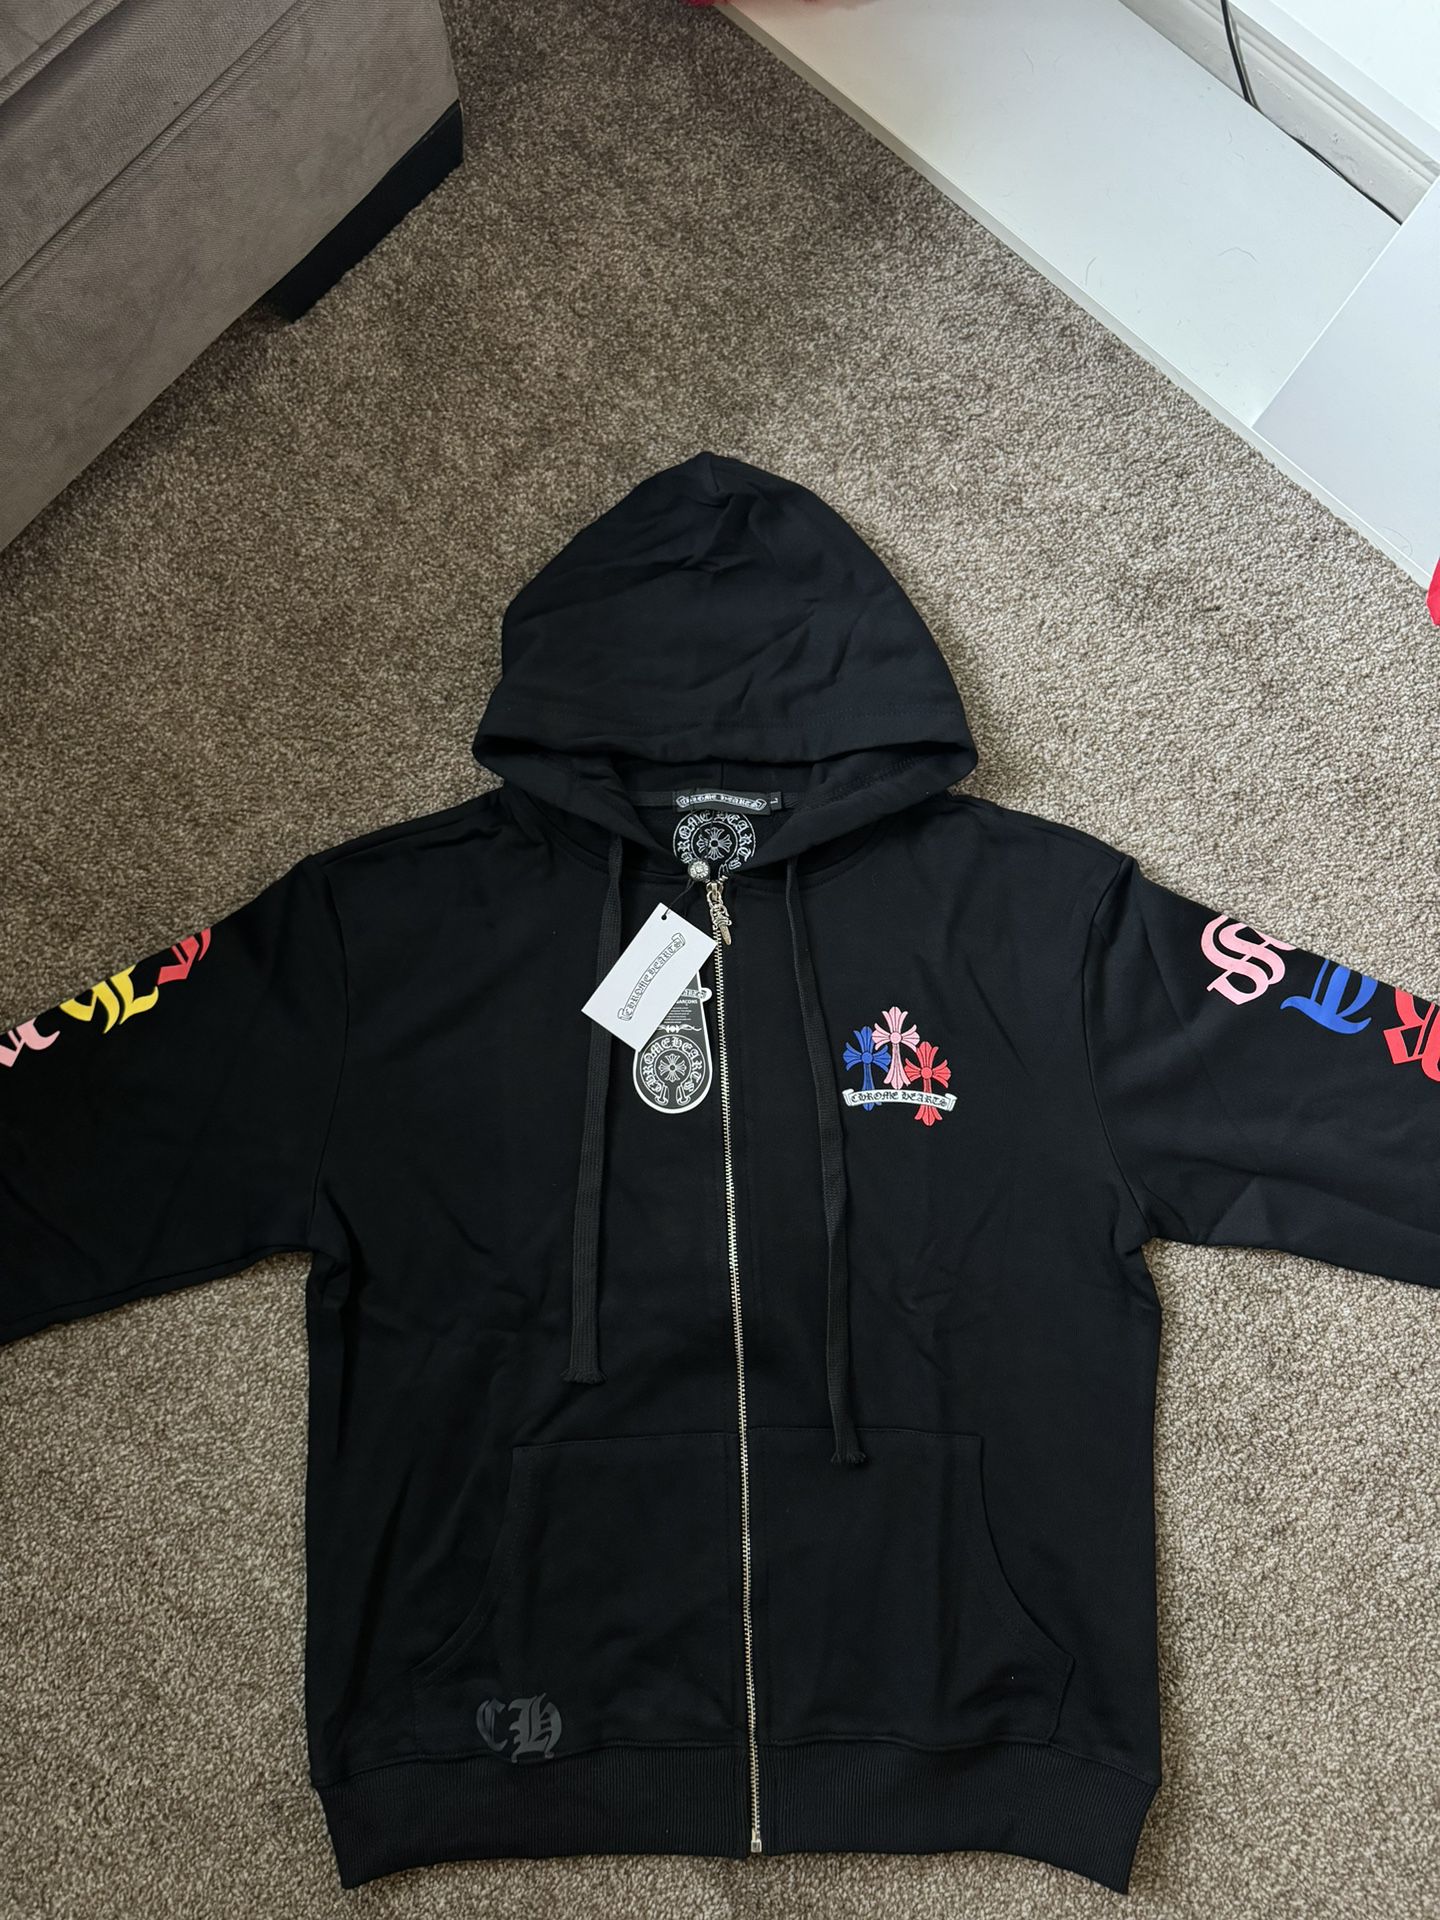 Chrome Hearts Zip Up Hoodie Size L 